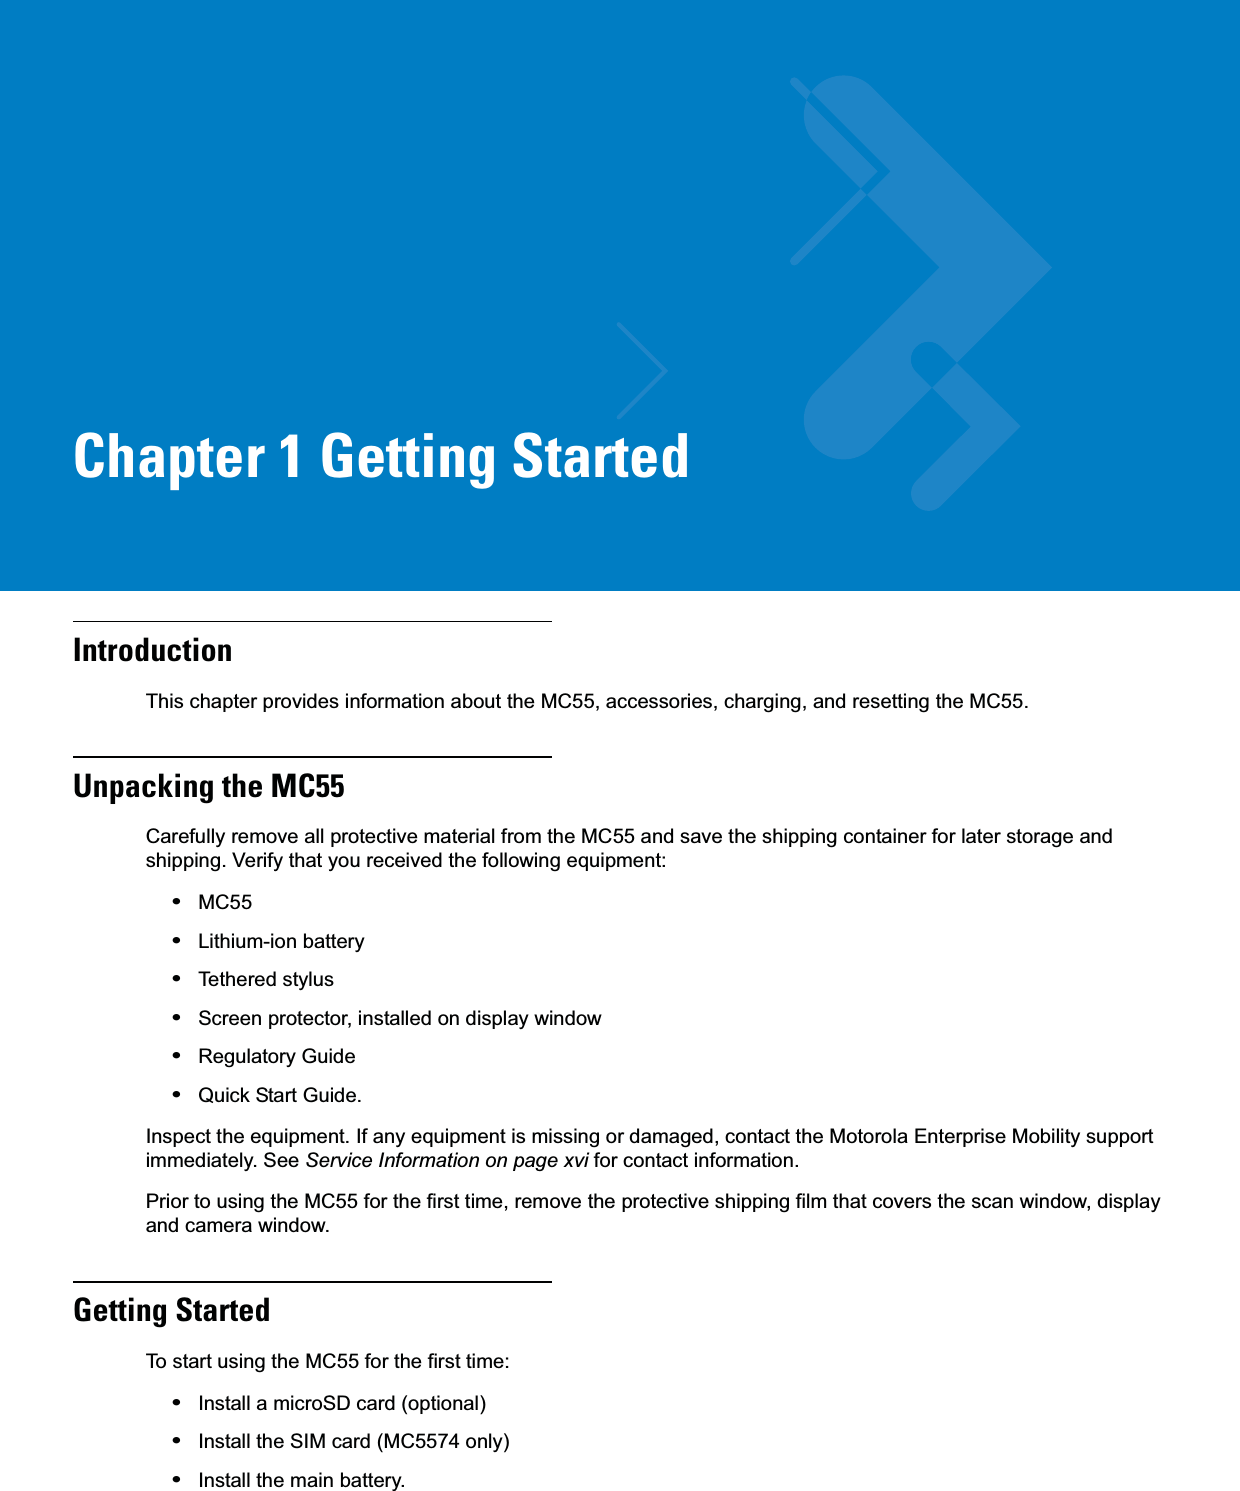 Chapter 1 Getting StartedIntroductionThis chapter provides information about the MC55, accessories, charging, and resetting the MC55.Unpacking the MC55Carefully remove all protective material from the MC55 and save the shipping container for later storage and shipping. Verify that you received the following equipment:•MC55•Lithium-ion battery•Tethered stylus•Screen protector, installed on display window•Regulatory Guide•Quick Start Guide.Inspect the equipment. If any equipment is missing or damaged, contact the Motorola Enterprise Mobility support immediately. See Service Information on page xvi for contact information.Prior to using the MC55 for the first time, remove the protective shipping film that covers the scan window, display and camera window.Getting StartedTo start using the MC55 for the first time:•Install a microSD card (optional)•Install the SIM card (MC5574 only)•Install the main battery.